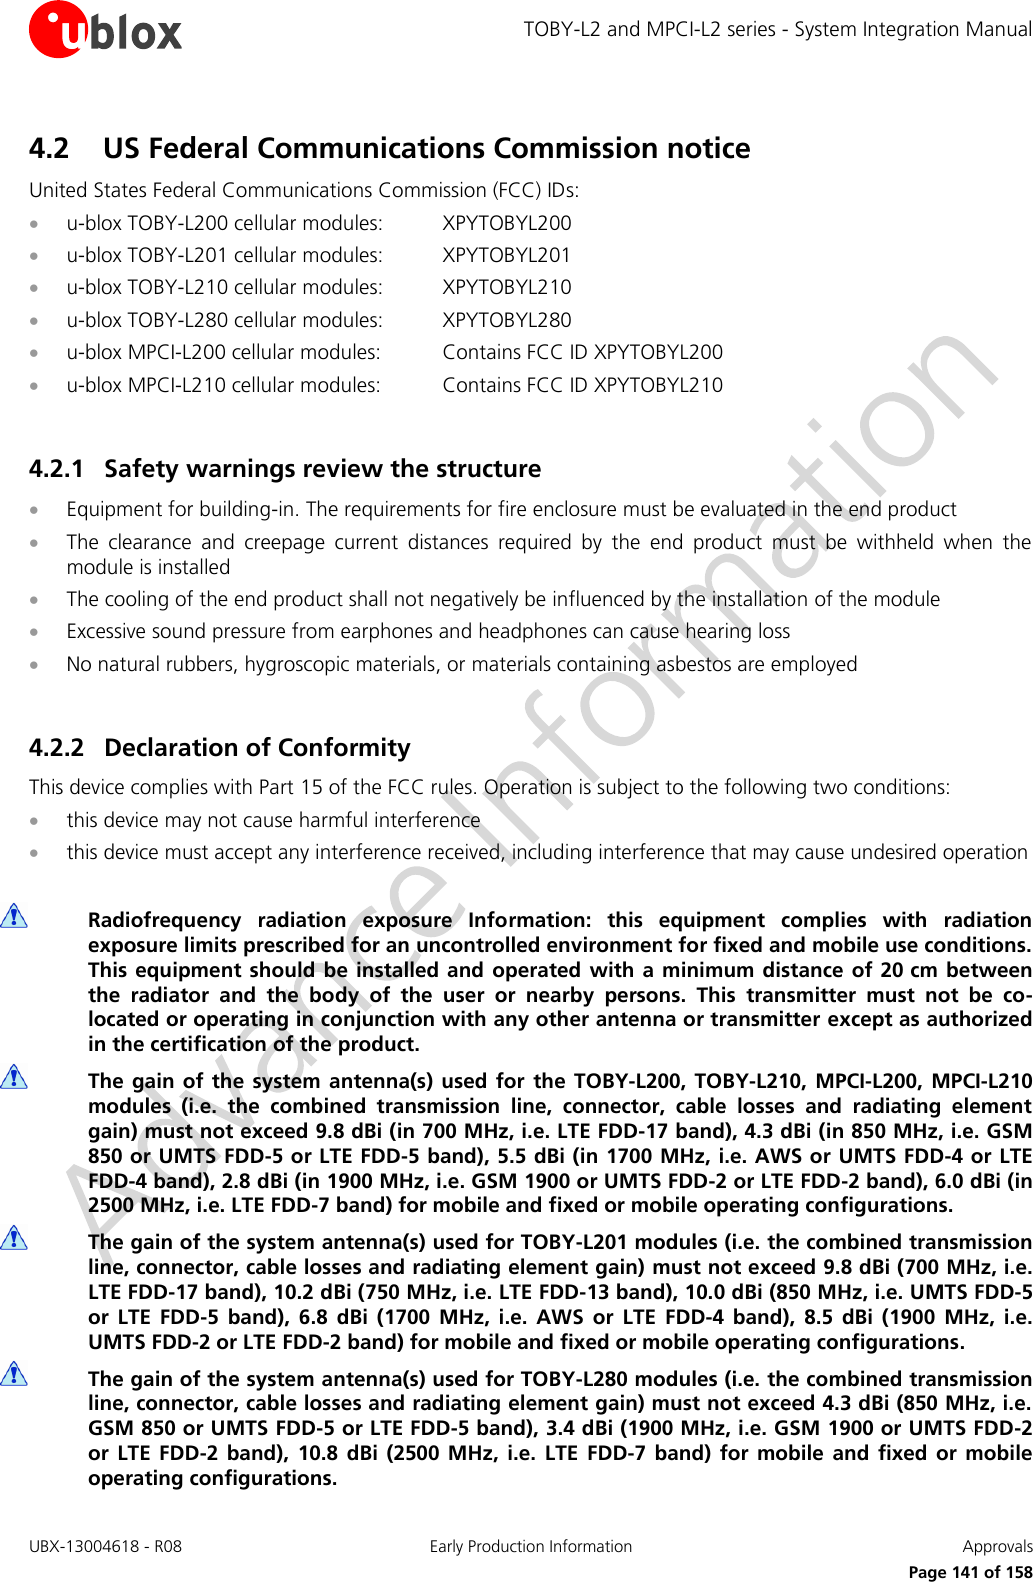 TOBY-L2 and MPCI-L2 series - System Integration Manual UBX-13004618 - R08  Early Production Information  Approvals     Page 141 of 158 4.2 US Federal Communications Commission notice  United States Federal Communications Commission (FCC) IDs:  u-blox TOBY-L200 cellular modules:  XPYTOBYL200  u-blox TOBY-L201 cellular modules:  XPYTOBYL201  u-blox TOBY-L210 cellular modules:  XPYTOBYL210  u-blox TOBY-L280 cellular modules:  XPYTOBYL280  u-blox MPCI-L200 cellular modules:  Contains FCC ID XPYTOBYL200  u-blox MPCI-L210 cellular modules:  Contains FCC ID XPYTOBYL210  4.2.1 Safety warnings review the structure  Equipment for building-in. The requirements for fire enclosure must be evaluated in the end product  The  clearance  and  creepage  current  distances  required  by  the  end  product  must  be  withheld  when  the module is installed  The cooling of the end product shall not negatively be influenced by the installation of the module  Excessive sound pressure from earphones and headphones can cause hearing loss  No natural rubbers, hygroscopic materials, or materials containing asbestos are employed  4.2.2 Declaration of Conformity  This device complies with Part 15 of the FCC rules. Operation is subject to the following two conditions:  this device may not cause harmful interference  this device must accept any interference received, including interference that may cause undesired operation   Radiofrequency  radiation  exposure  Information:  this  equipment  complies  with  radiation exposure limits prescribed for an uncontrolled environment for fixed and mobile use conditions. This equipment should be installed and  operated  with  a minimum  distance of 20 cm between the  radiator  and  the  body  of  the  user  or  nearby  persons.  This  transmitter  must  not  be  co-located or operating in conjunction with any other antenna or transmitter except as authorized in the certification of the product.  The gain of the  system antenna(s)  used for  the  TOBY-L200,  TOBY-L210,  MPCI-L200,  MPCI-L210 modules  (i.e.  the  combined  transmission  line,  connector,  cable  losses  and  radiating  element gain) must not exceed 9.8 dBi (in 700 MHz, i.e. LTE FDD-17 band), 4.3 dBi (in 850 MHz, i.e. GSM 850 or UMTS FDD-5 or LTE FDD-5 band), 5.5 dBi (in 1700 MHz, i.e. AWS or UMTS FDD-4 or LTE FDD-4 band), 2.8 dBi (in 1900 MHz, i.e. GSM 1900 or UMTS FDD-2 or LTE FDD-2 band), 6.0 dBi (in 2500 MHz, i.e. LTE FDD-7 band) for mobile and fixed or mobile operating configurations.  The gain of the system antenna(s) used for TOBY-L201 modules (i.e. the combined transmission line, connector, cable losses and radiating element gain) must not exceed 9.8 dBi (700 MHz, i.e. LTE FDD-17 band), 10.2 dBi (750 MHz, i.e. LTE FDD-13 band), 10.0 dBi (850 MHz, i.e. UMTS FDD-5 or  LTE  FDD-5  band),  6.8  dBi  (1700  MHz,  i.e.  AWS  or  LTE  FDD-4  band),  8.5  dBi  (1900  MHz,  i.e. UMTS FDD-2 or LTE FDD-2 band) for mobile and fixed or mobile operating configurations.  The gain of the system antenna(s) used for TOBY-L280 modules (i.e. the combined transmission line, connector, cable losses and radiating element gain) must not exceed 4.3 dBi (850 MHz, i.e. GSM 850 or UMTS FDD-5 or LTE FDD-5 band), 3.4 dBi (1900 MHz, i.e. GSM 1900 or UMTS FDD-2 or  LTE  FDD-2  band),  10.8  dBi  (2500  MHz,  i.e.  LTE  FDD-7  band)  for  mobile  and  fixed  or mobile operating configurations. 